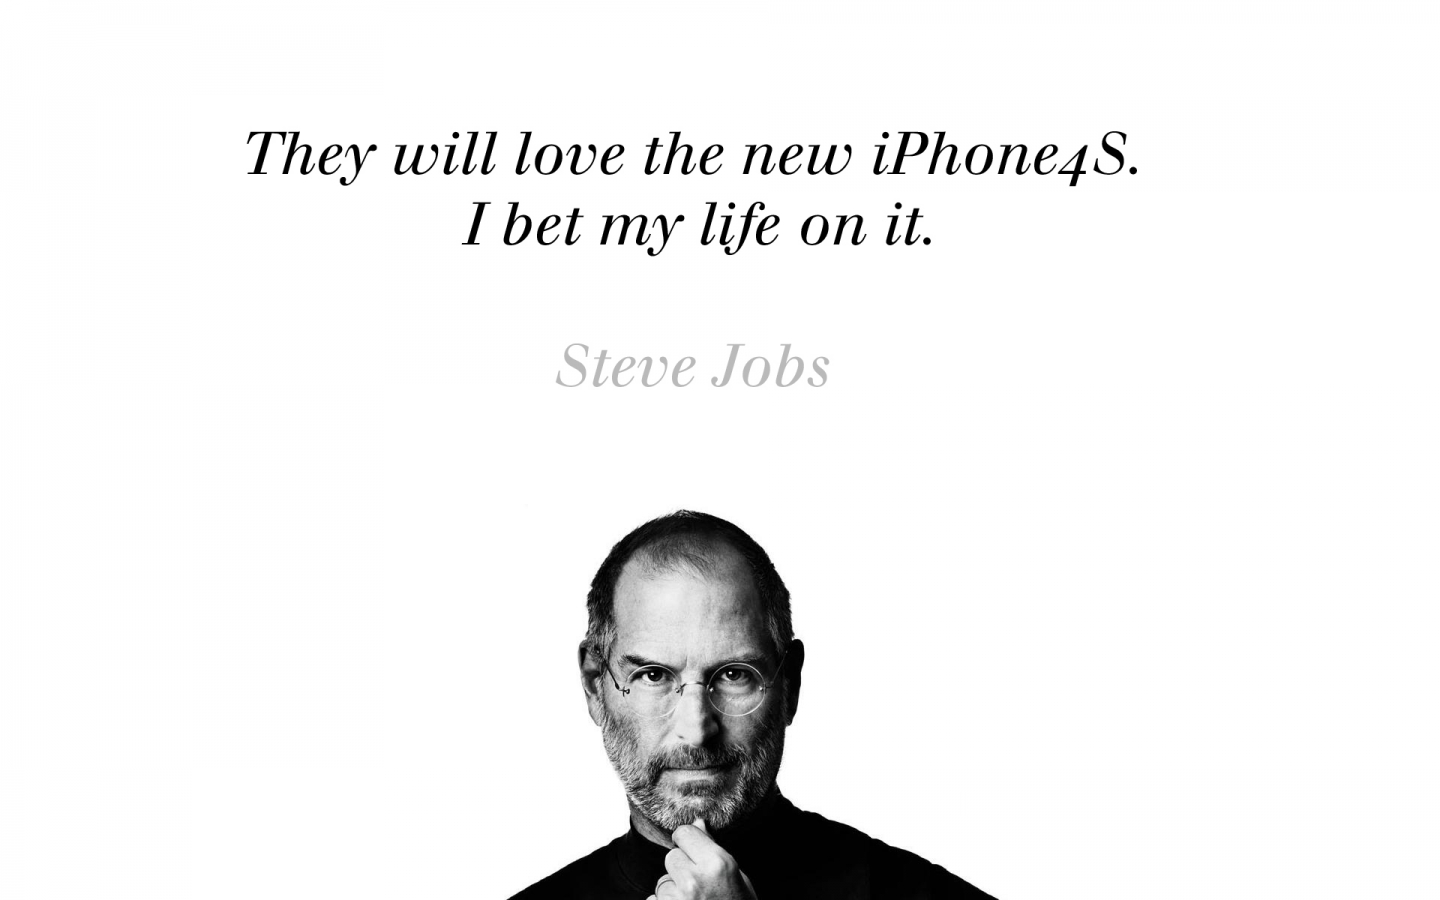 Steve Jobs about iPhone 4S for 1440 x 900 widescreen resolution